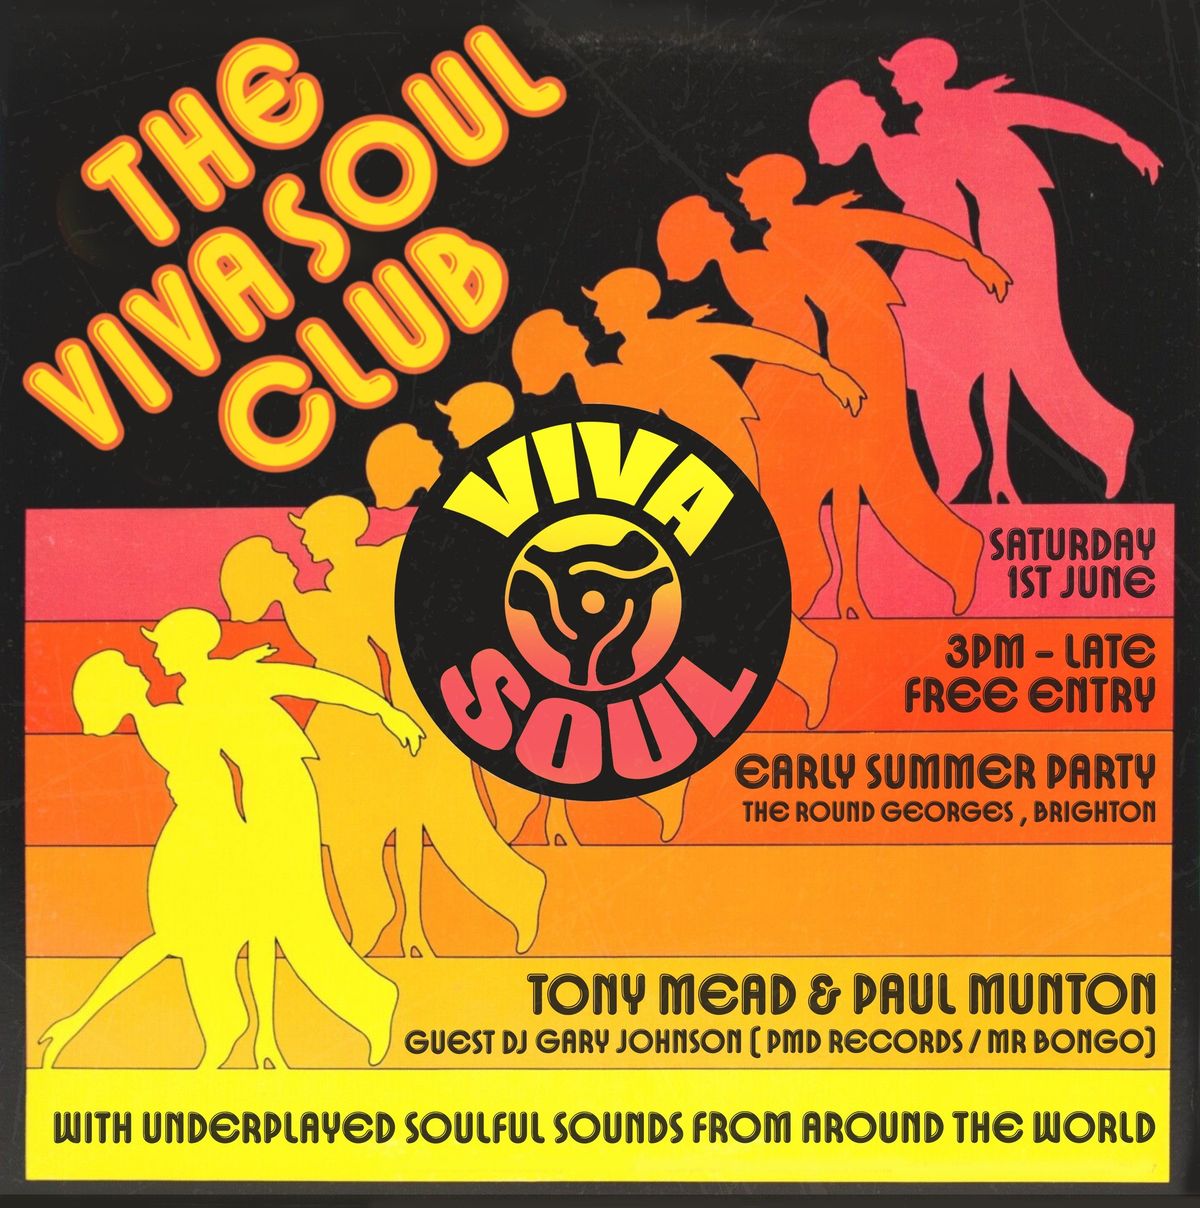 The Viva Soul Club Summer Party 